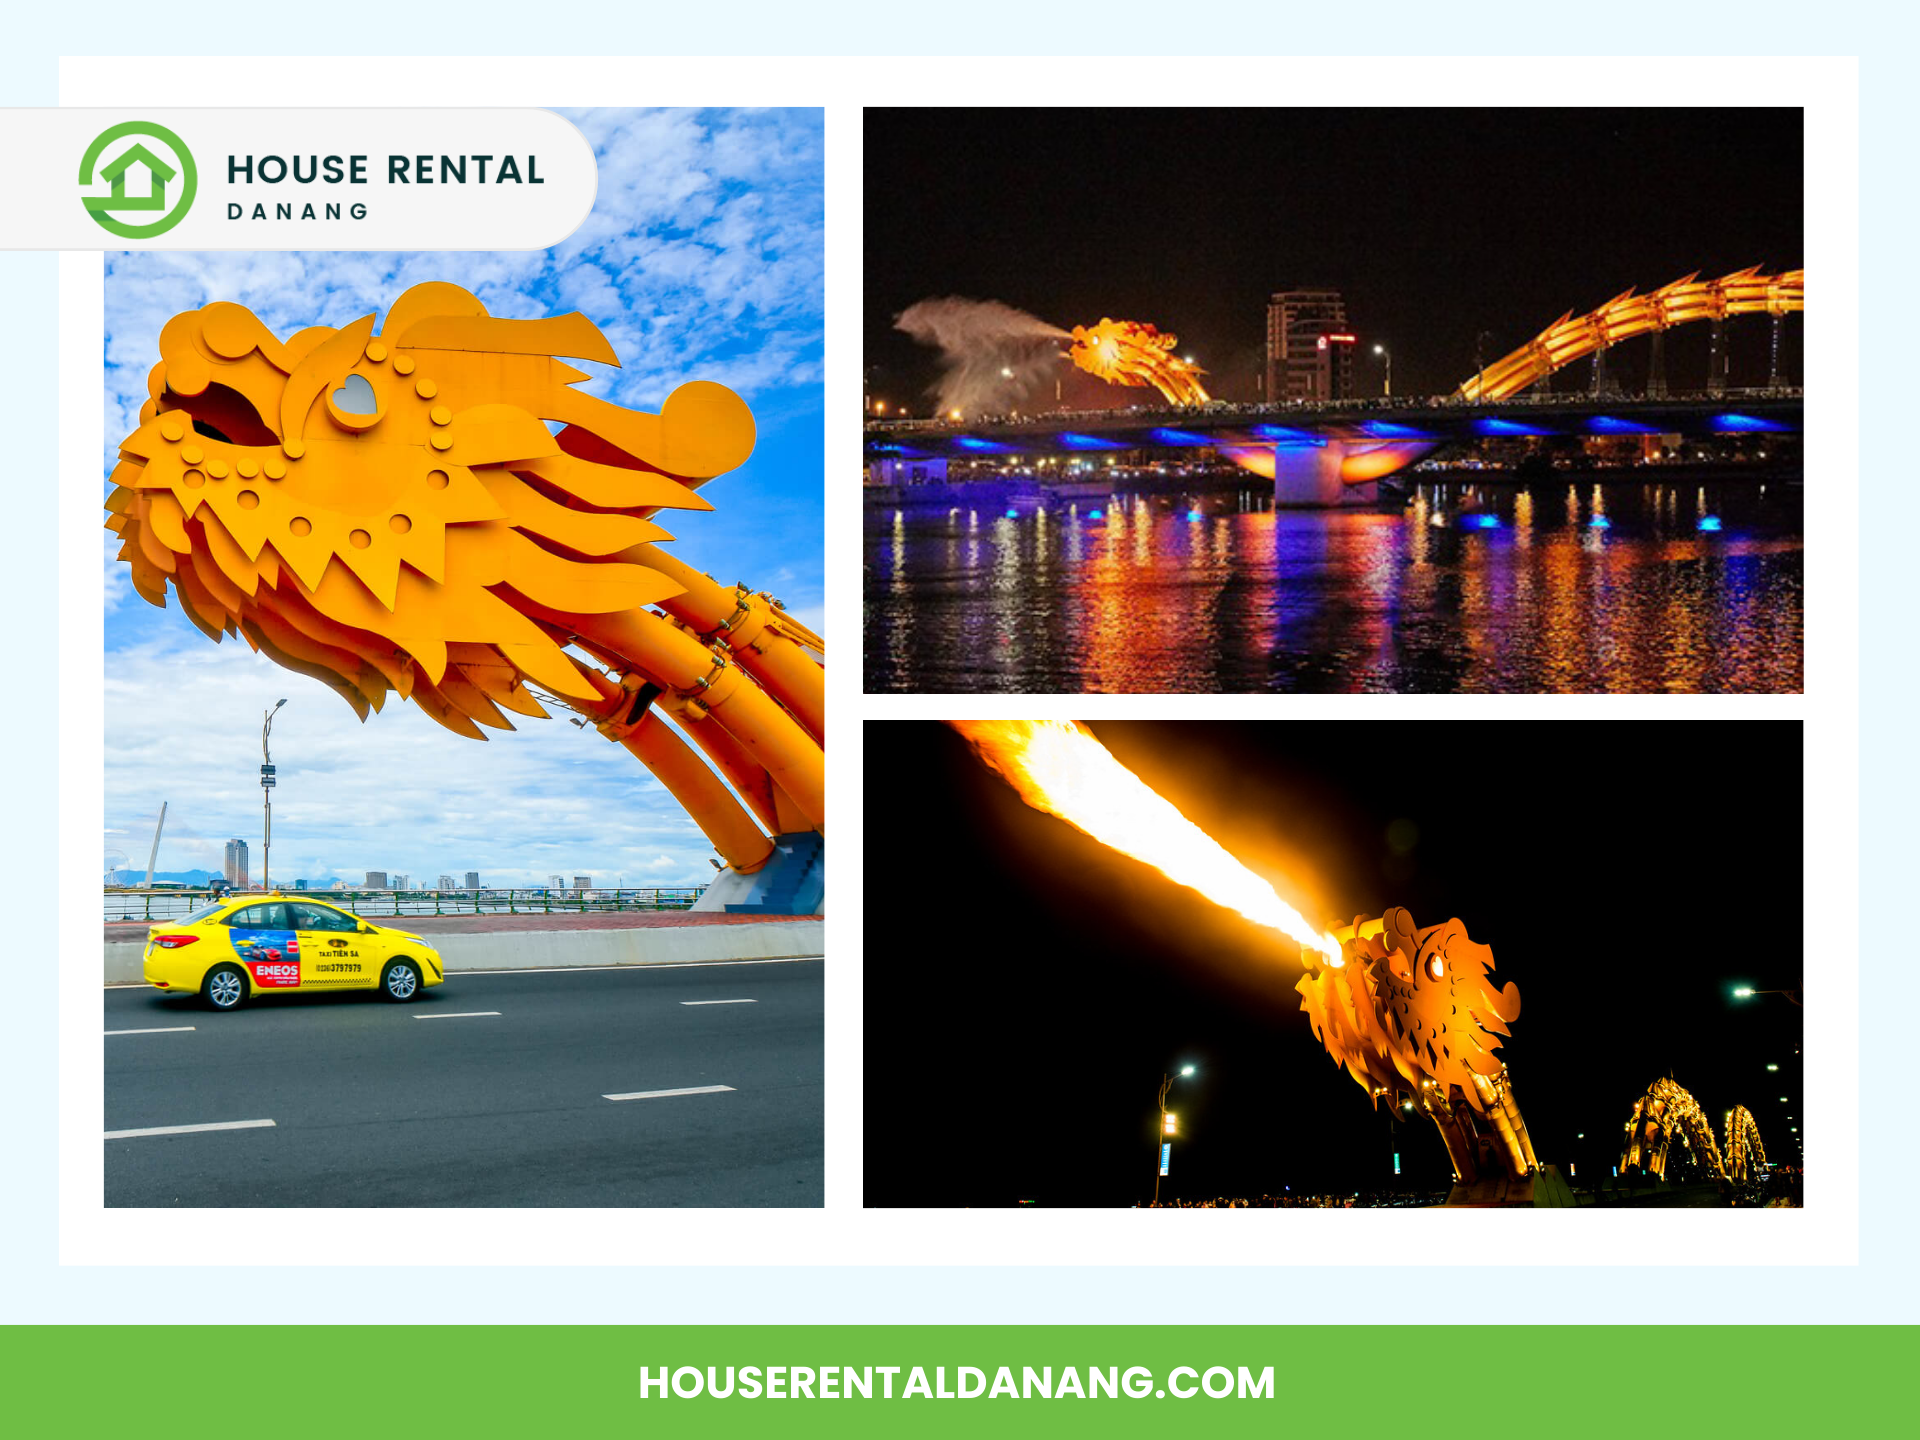 A collage highlights the Dragon Bridge in Da Nang, Vietnam, showcasing it in daylight, brilliantly lit up at night, and spouting fire. A yellow taxi is also seen driving on the bridge during the day.